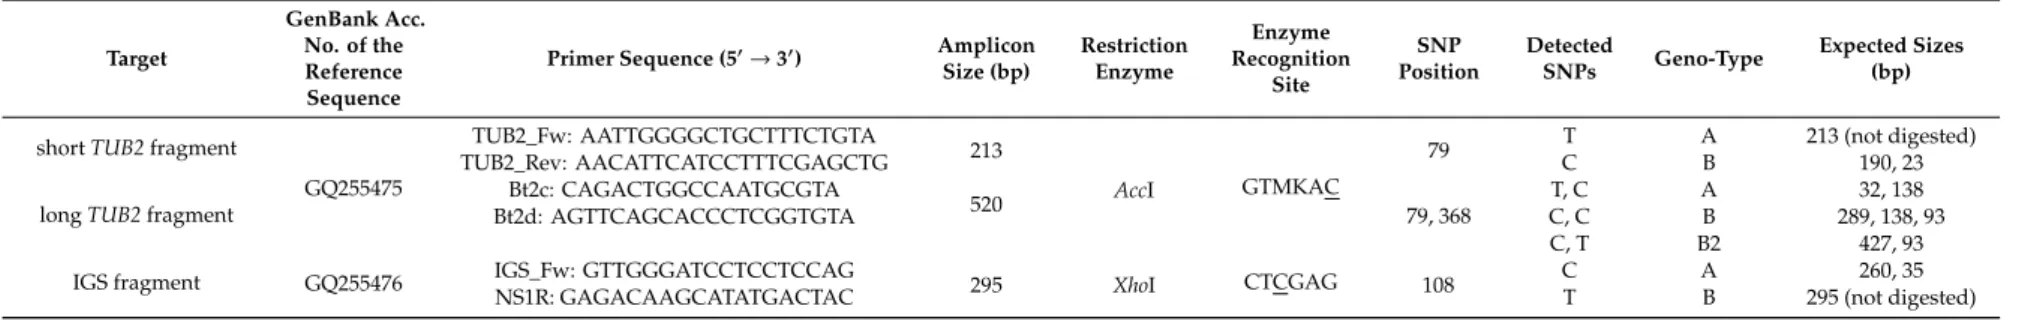 Table 1. Summary of Cleaved Amplified Polymorphic Sequence (CAPS) analyses of the beta-tubulin (TUB2) and the nrDNA intergenic spacer (IGS) fragments